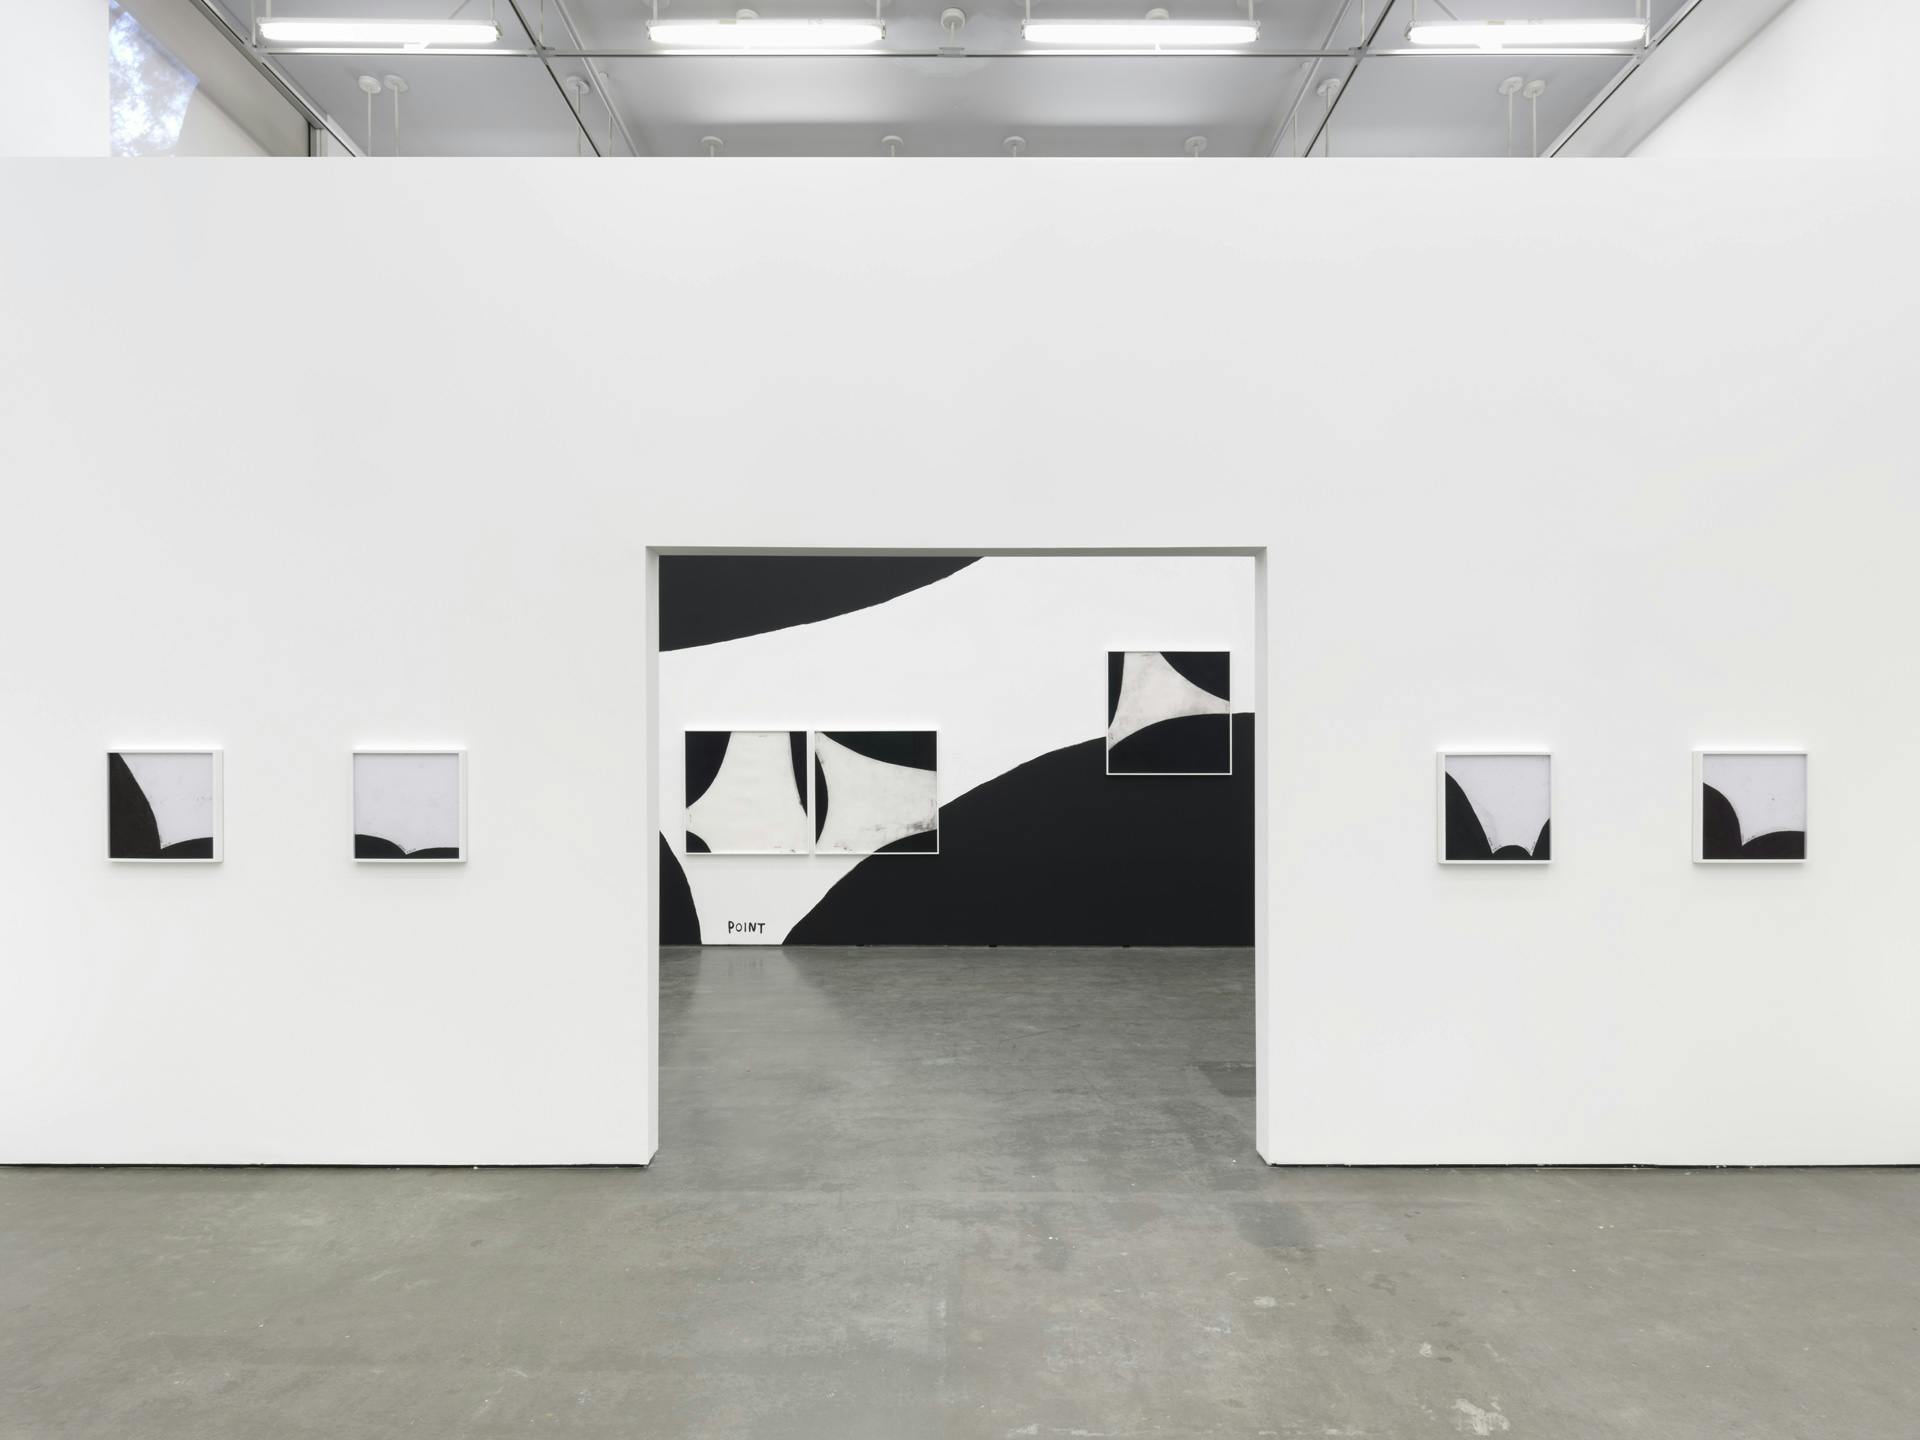 Four black and white drawings by Christine Sun Kim on a wall with an opening, through which a wall painting featuring the word "point" and three other drawings by Kim are visible.